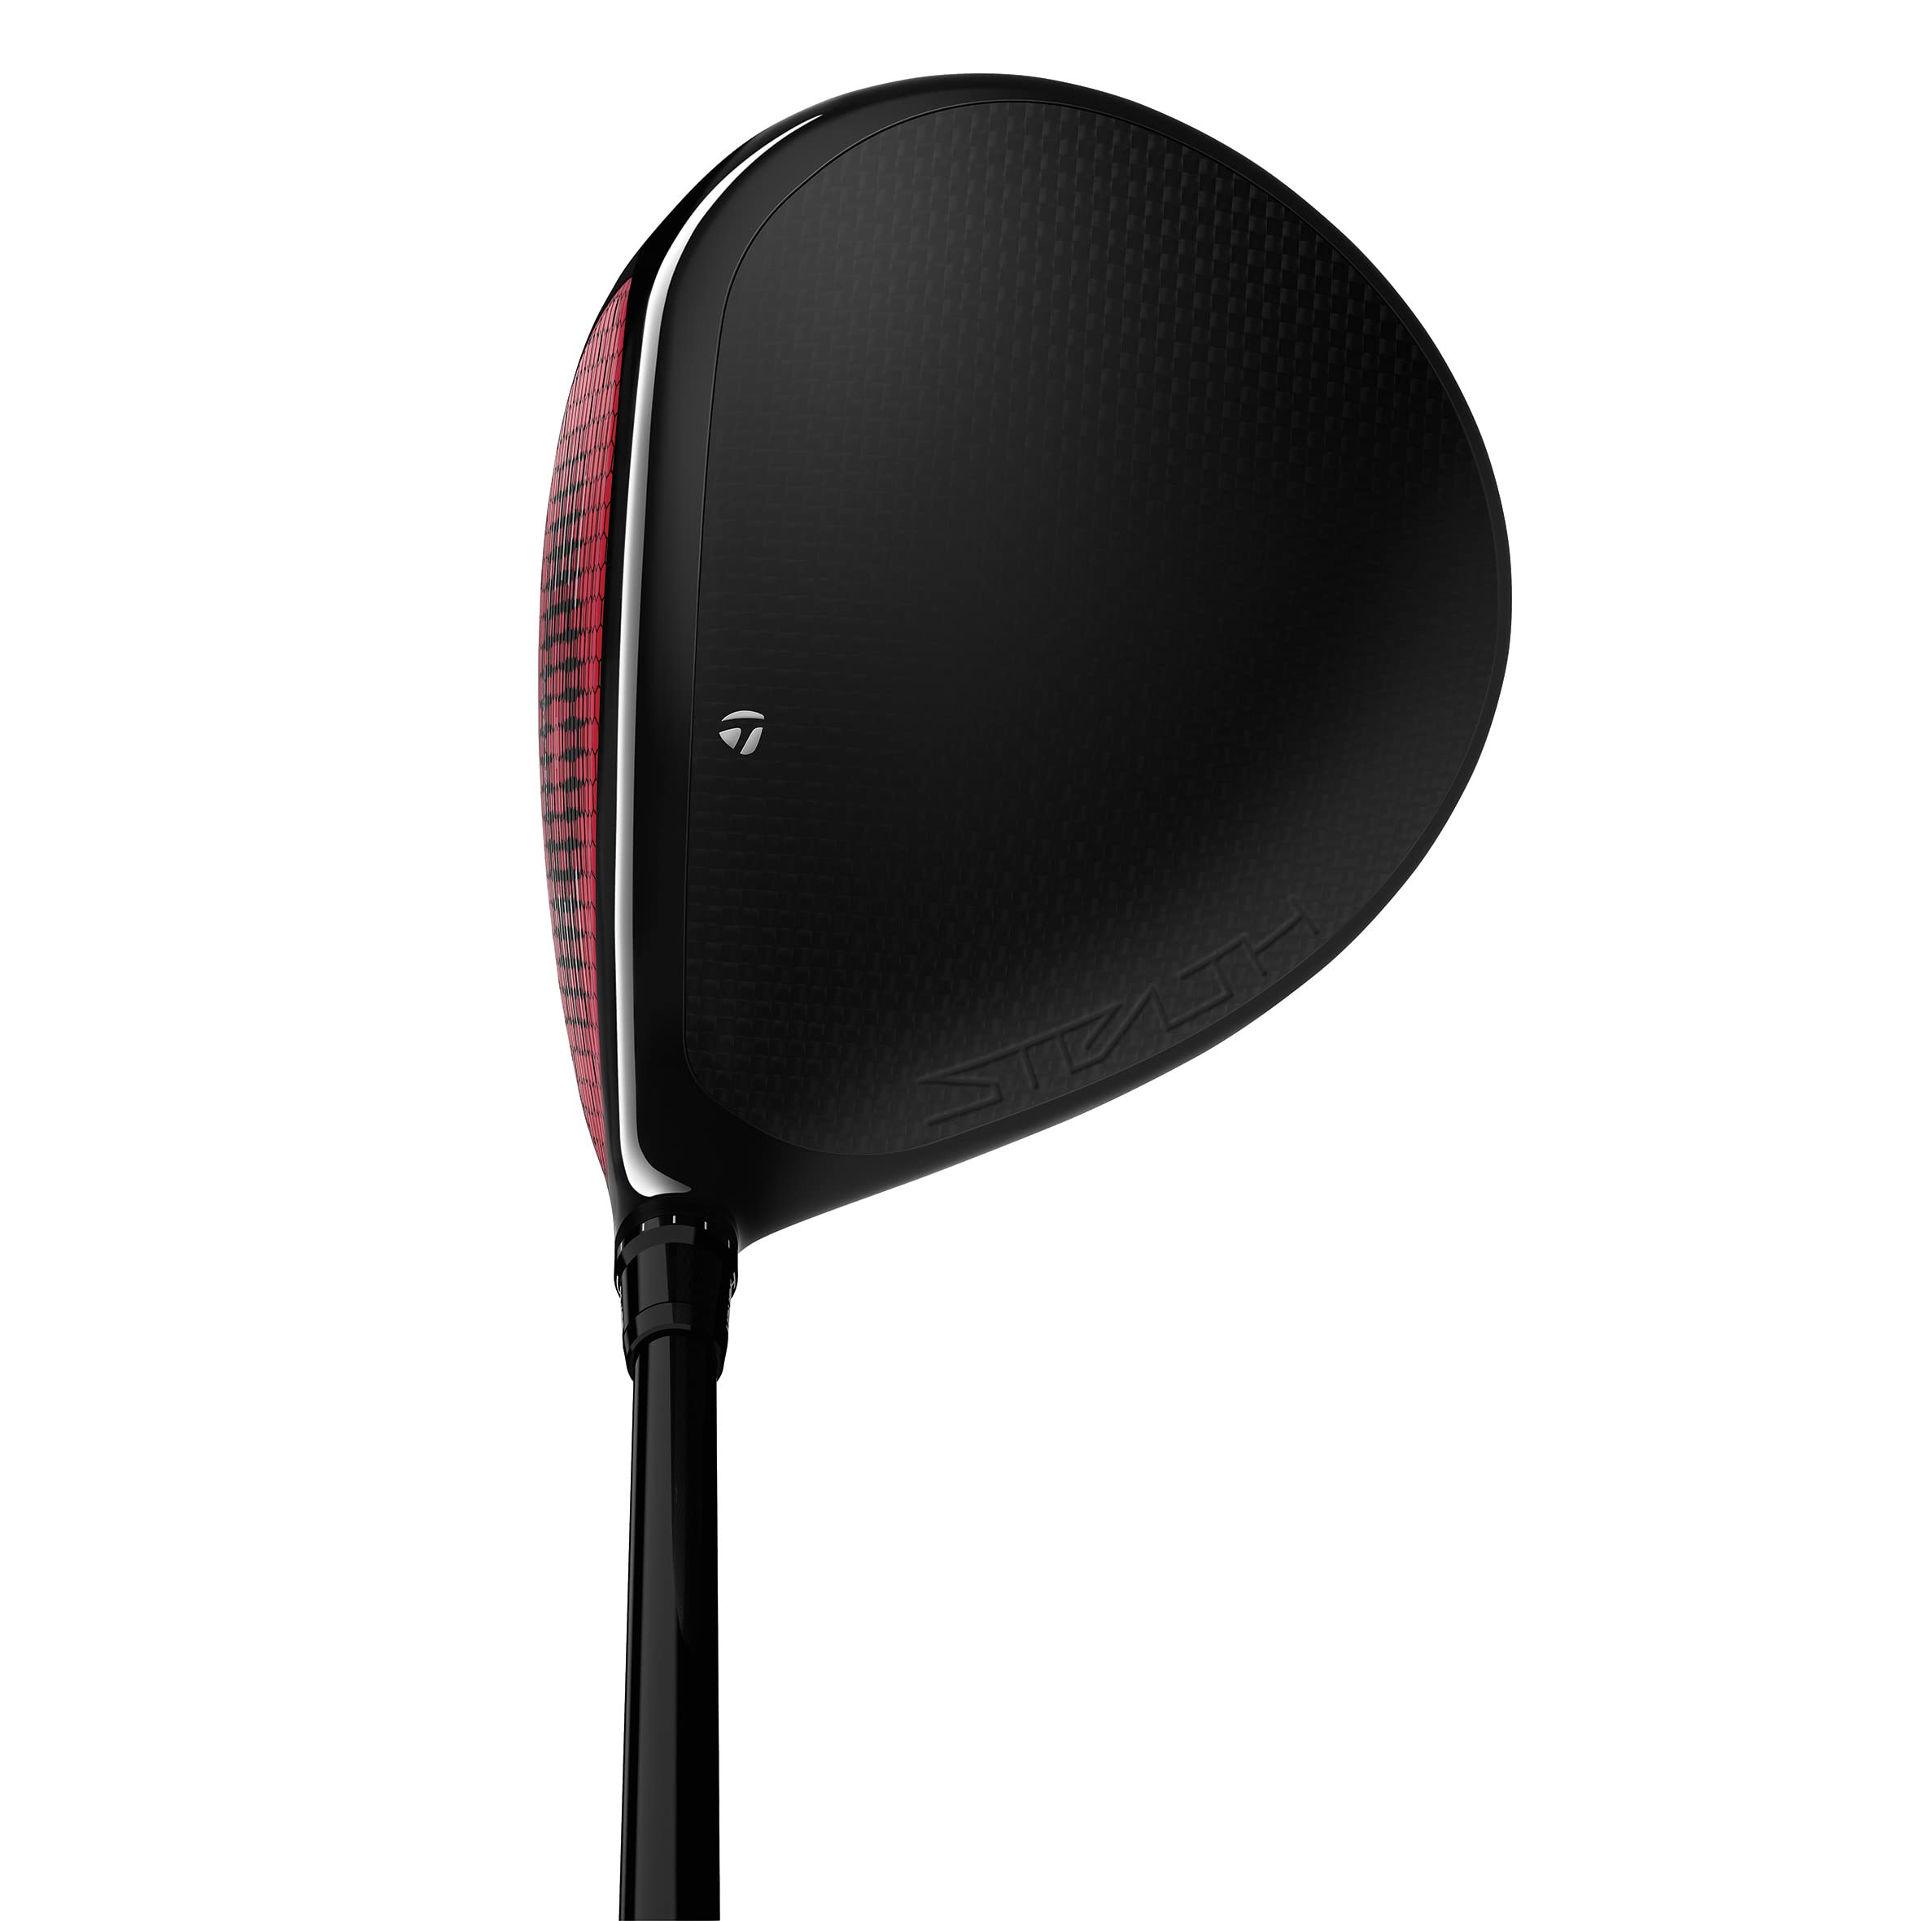 TaylorMade Stealth Driver 12.0